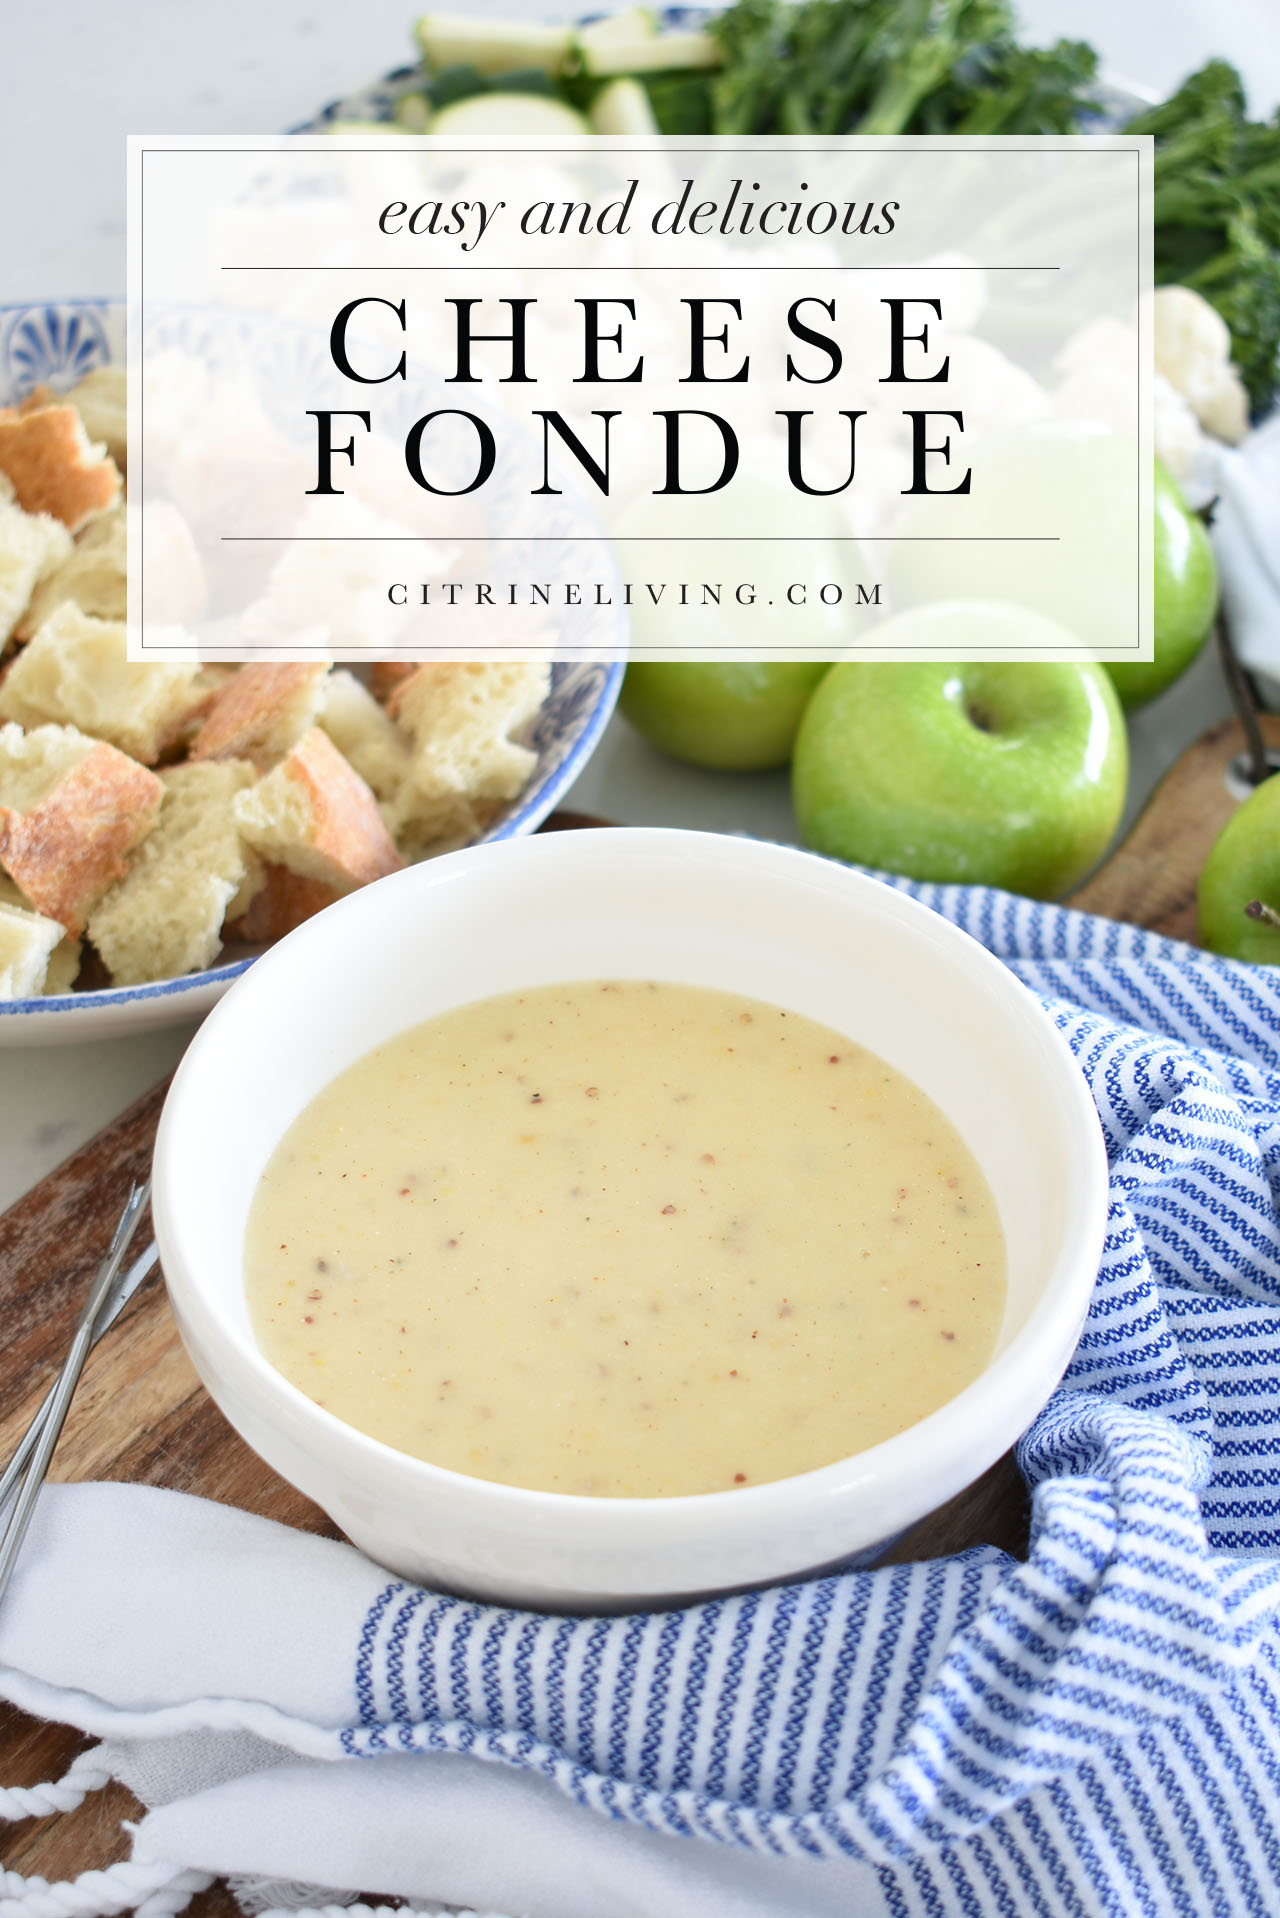 Easy and delicious cheese fondue recipe that you can serve any day of the week!